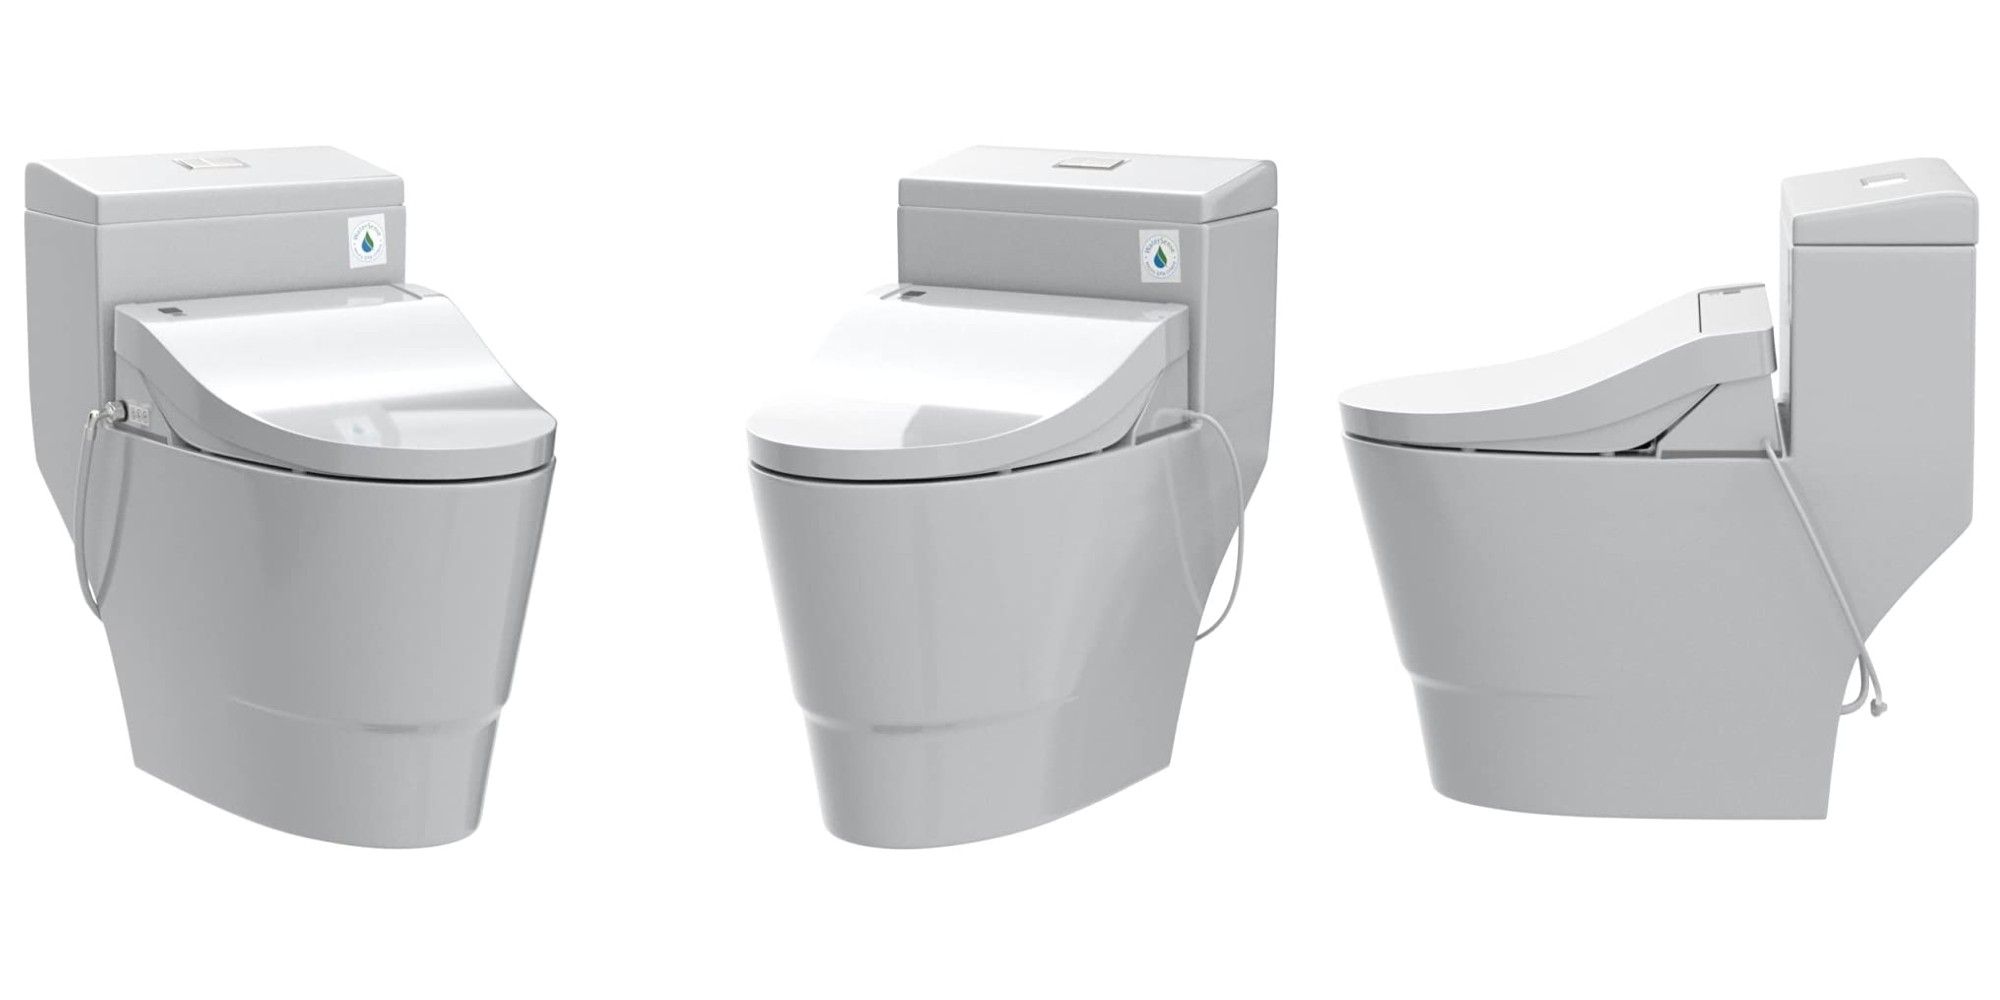 A photo showing the Woodbridge T-0008 Luxury Bidet Toilet from different angles